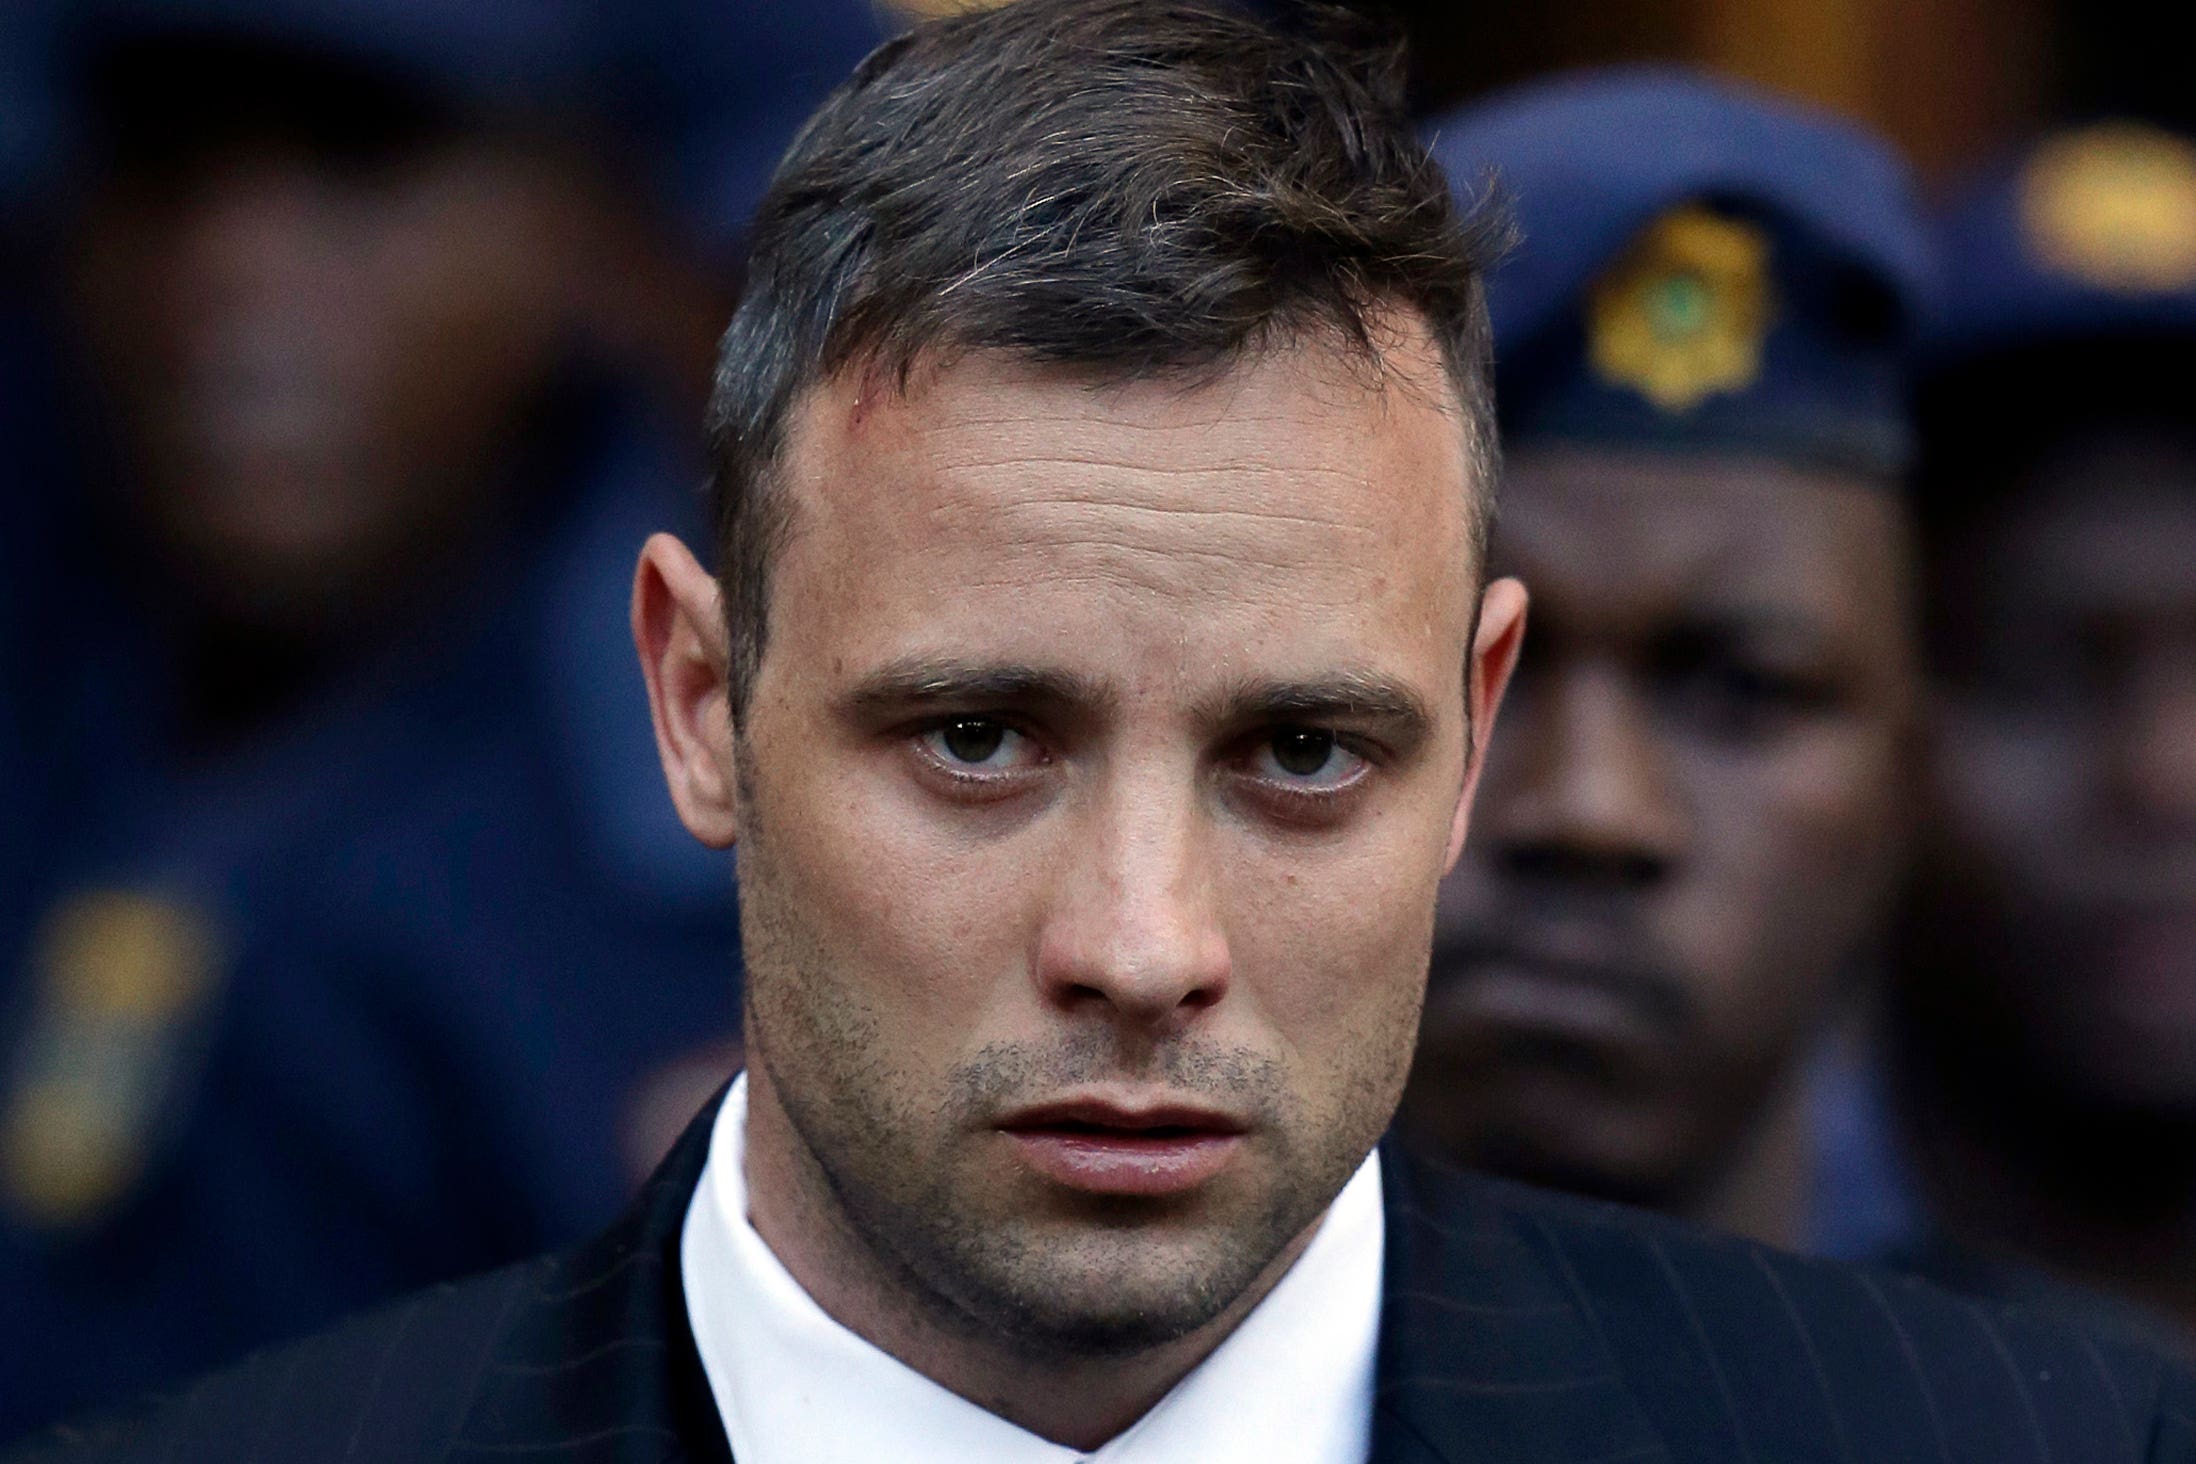 Pistorius seemed like an athlete for the ages – not just a winner, but a role model of international significance